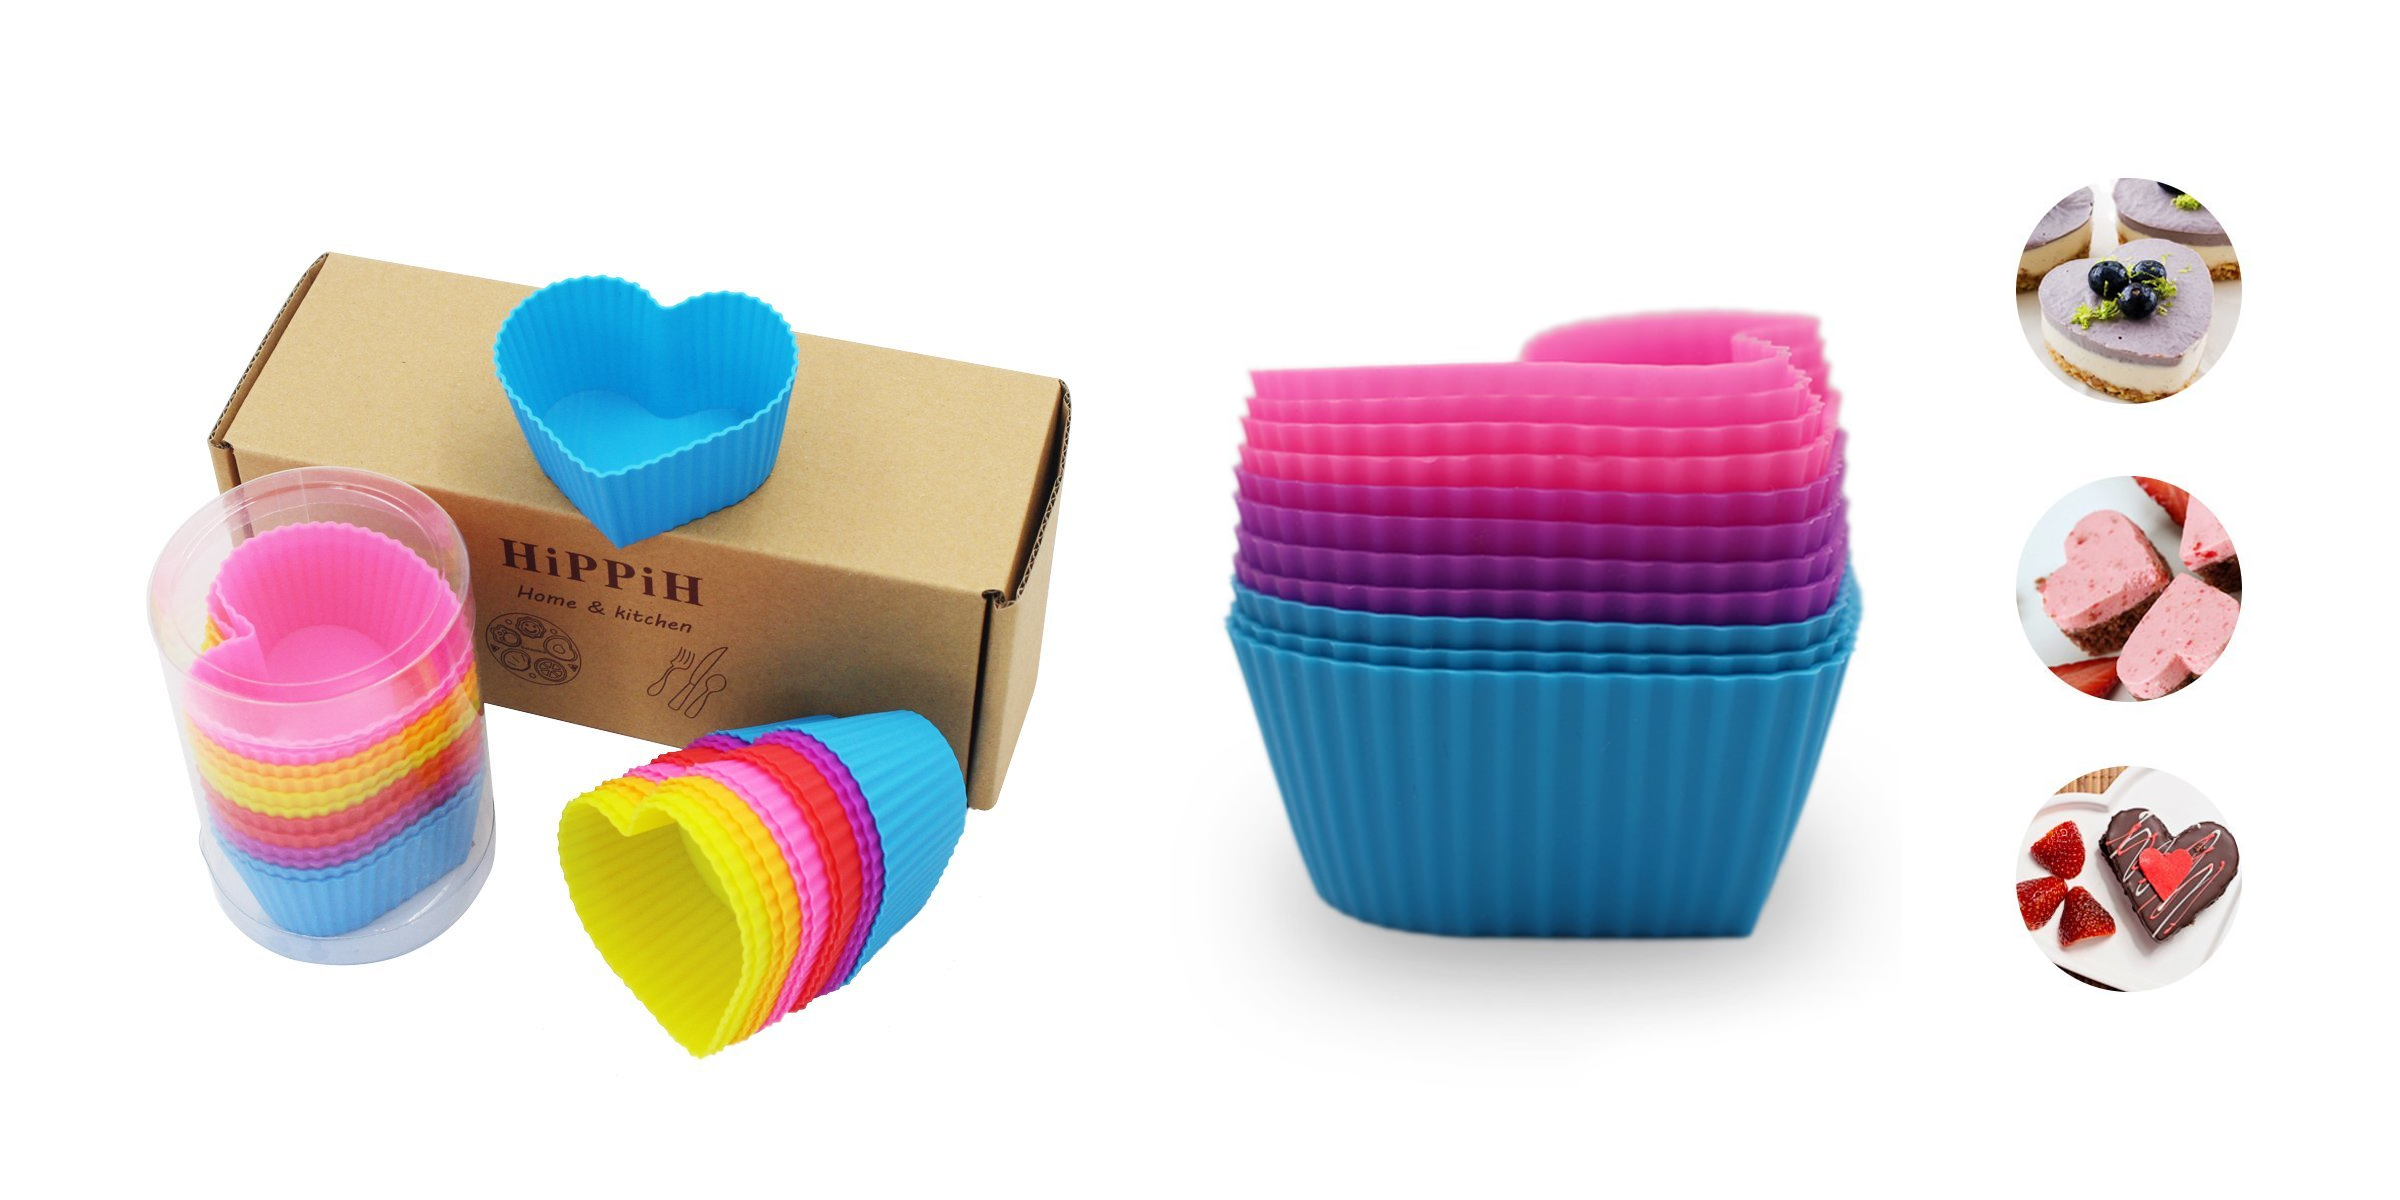 Set of 24 Heart Shaped Reusable Silicone Muffin Cups Only $5.99!